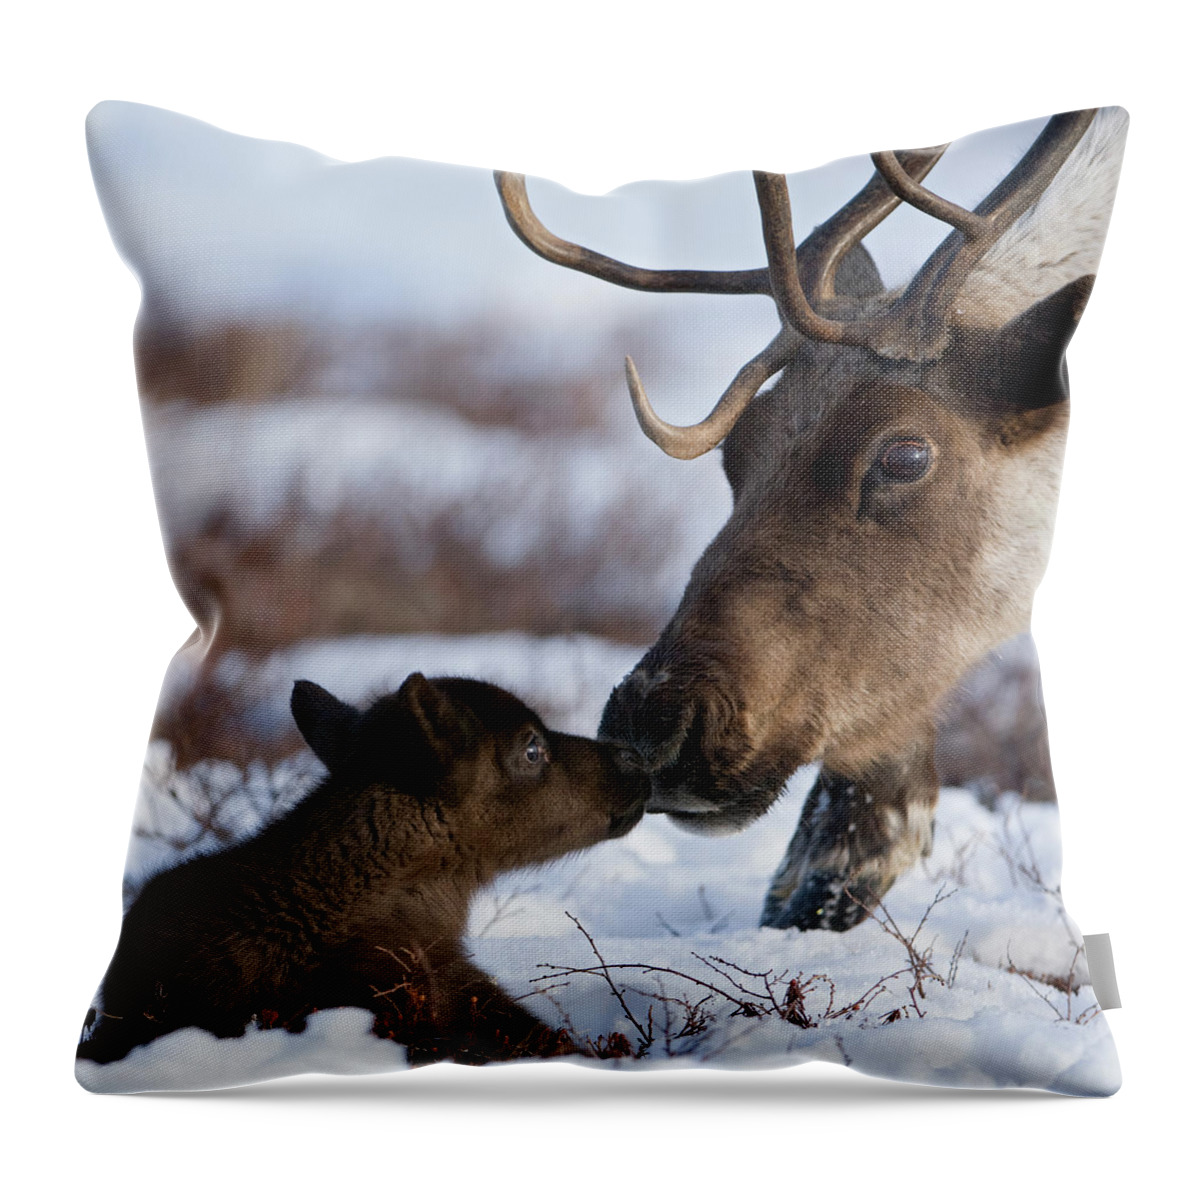 00782253 Throw Pillow featuring the photograph Caribou Mother Nuzzling Calf by Sergey Gorshkov